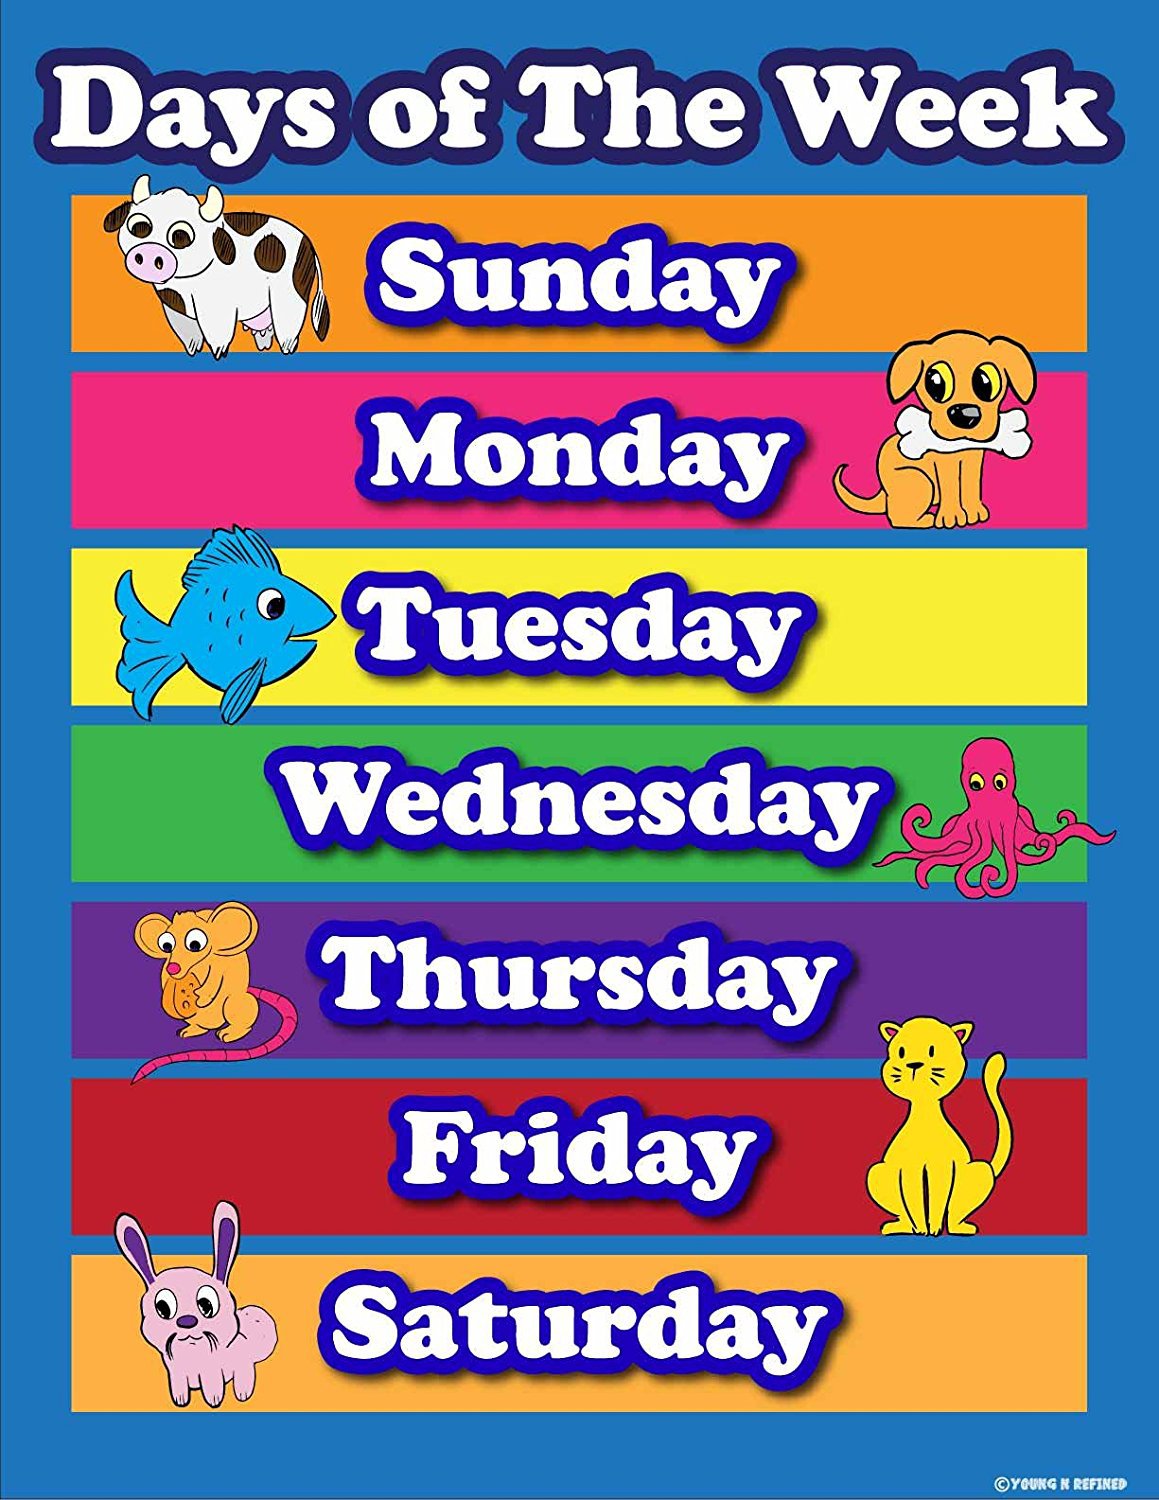 N the week. Days of the week. Days of the week for Kids. Days in English for Kids. English for Kids Days of the week.